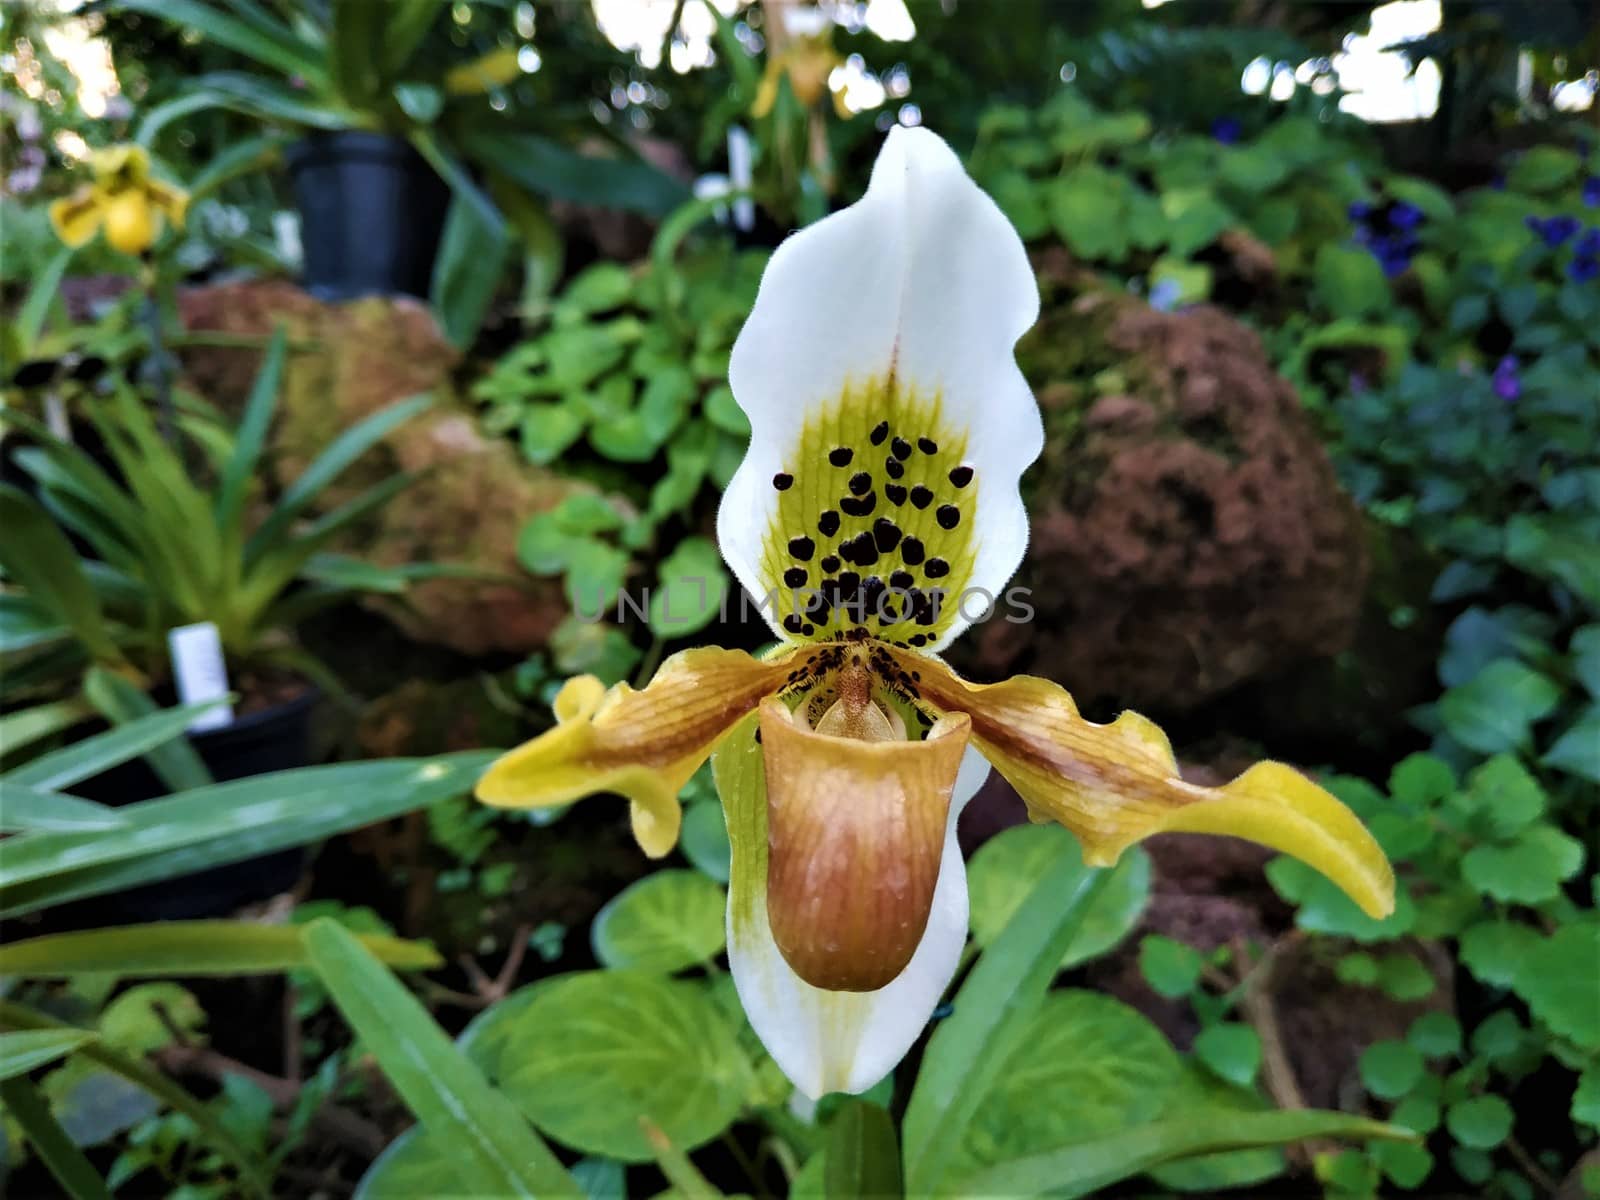 Spotted blossom of Paphiopedilum insigne hybride orchid by pisces2386